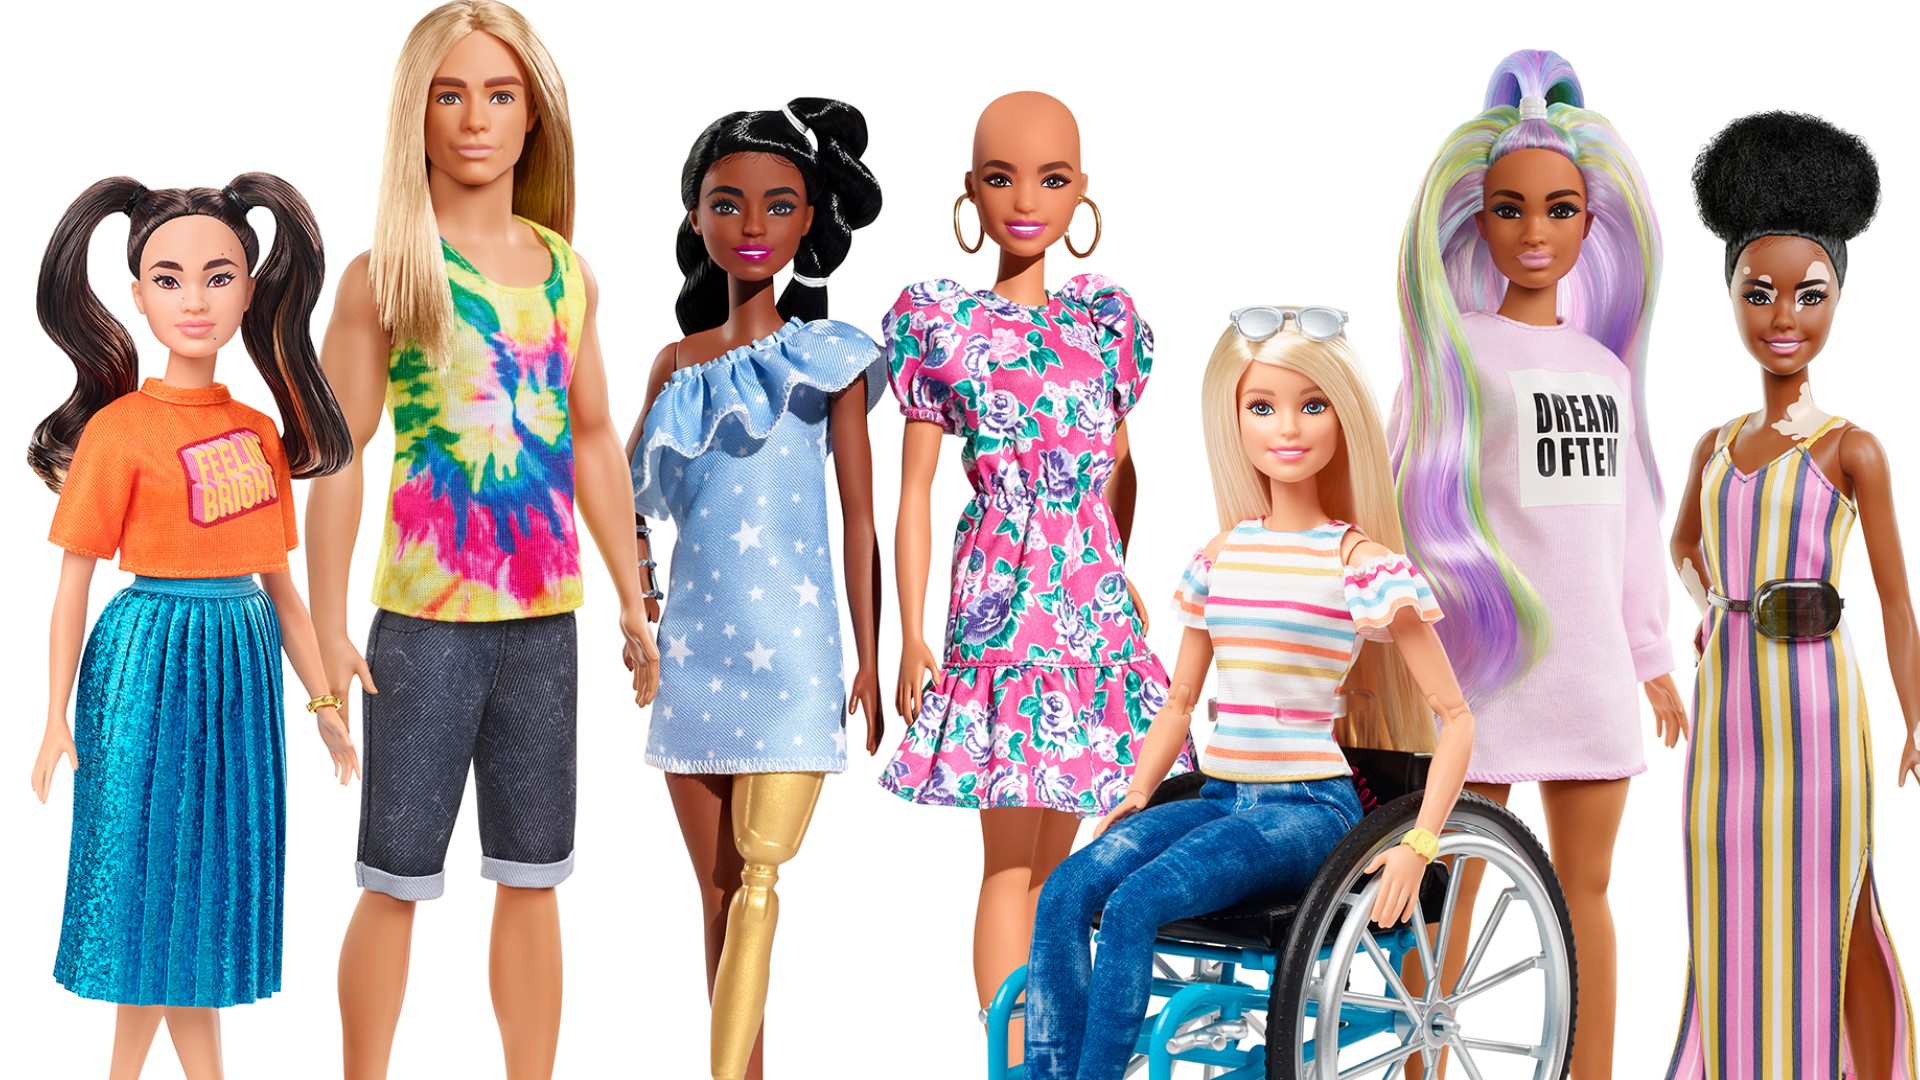 The days of blonde-haired, blue-eyed, and impossibly skinny Barbie dolls are over.